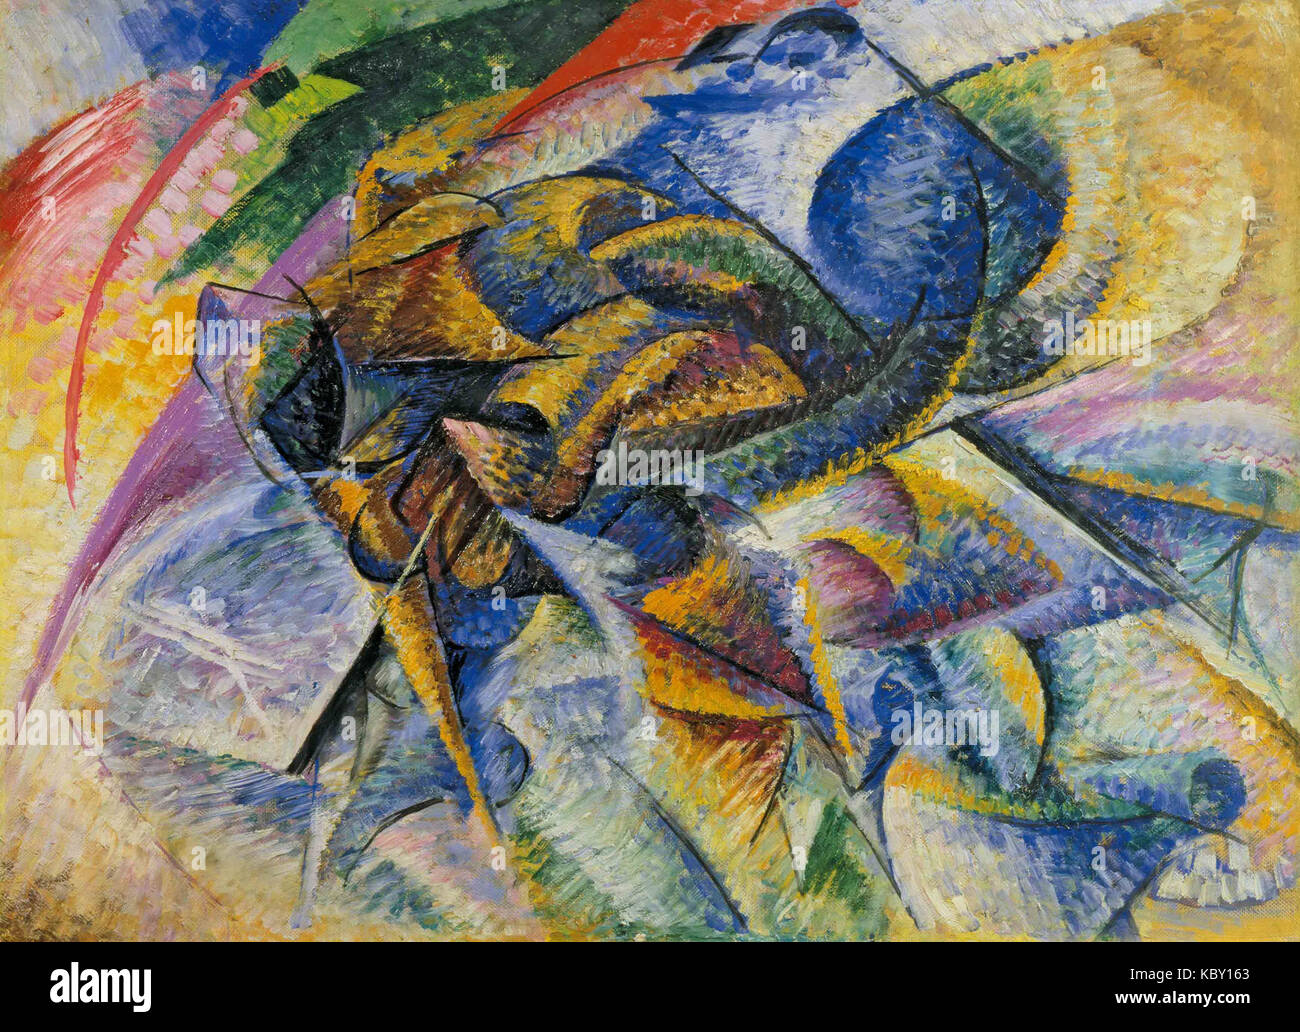 Umberto Boccioni, 1913, Dynamism of a Cyclist (Dinamismo di un ciclista), oil on canvas, 70 x 95 cm, Gianni Mattioli Collection, on long term loan to the Peggy Guggenheim Collection, Venice Stock Photo